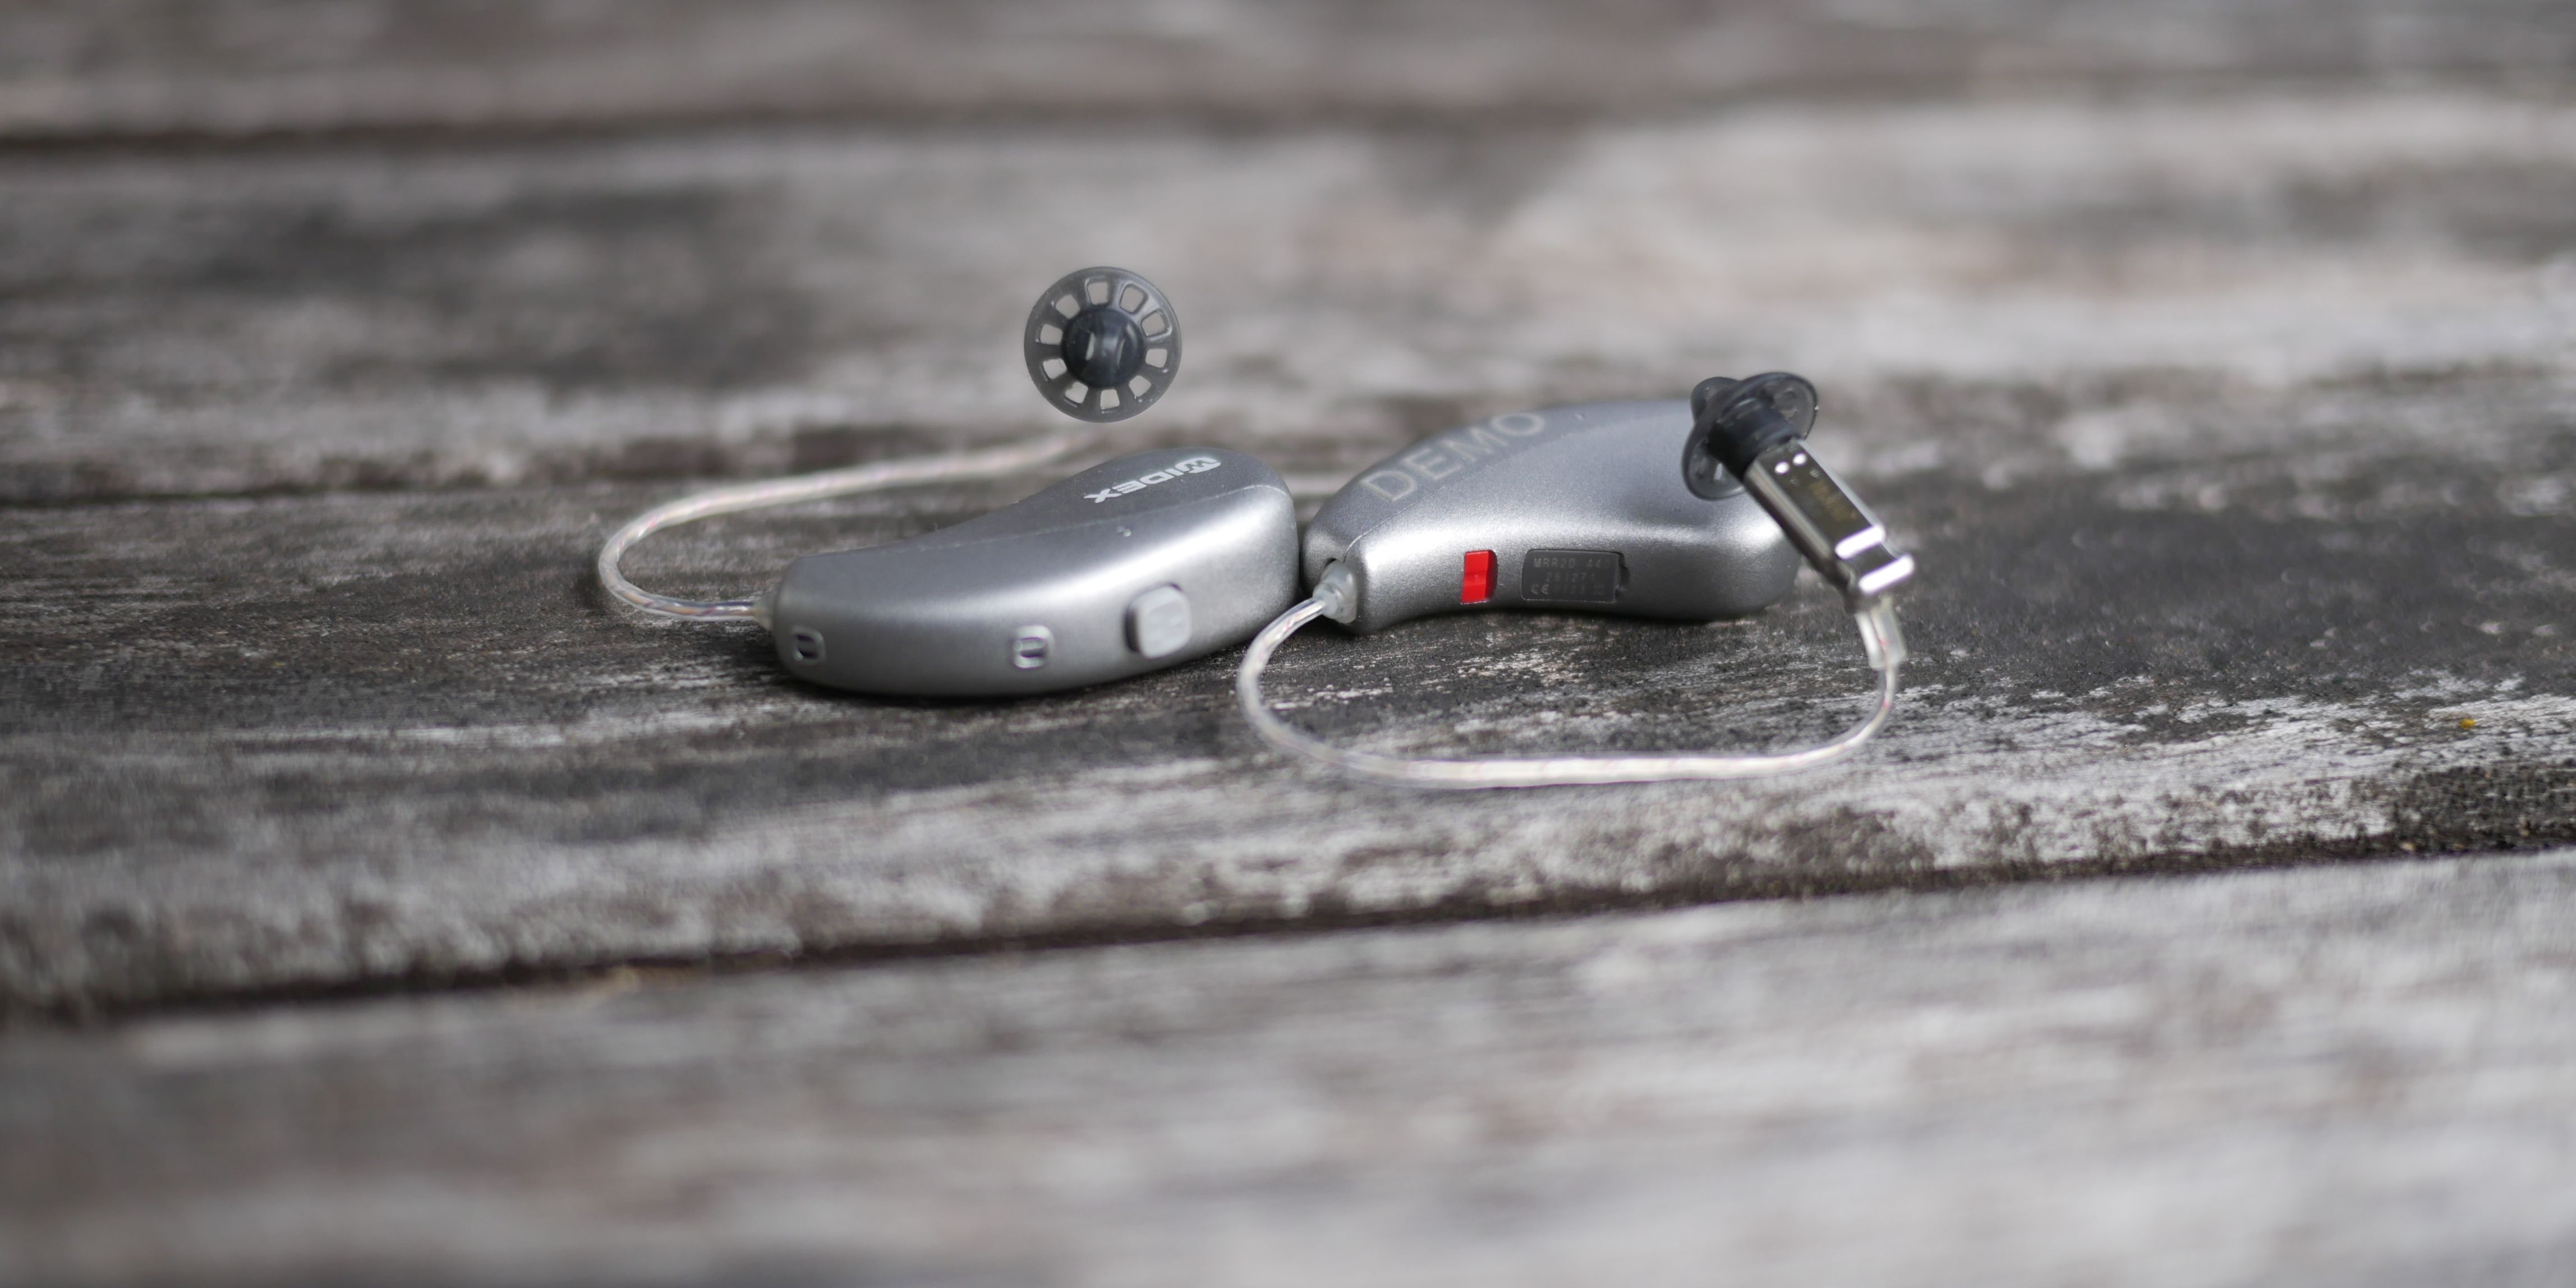 Widex MOMENT hearing aids close-up